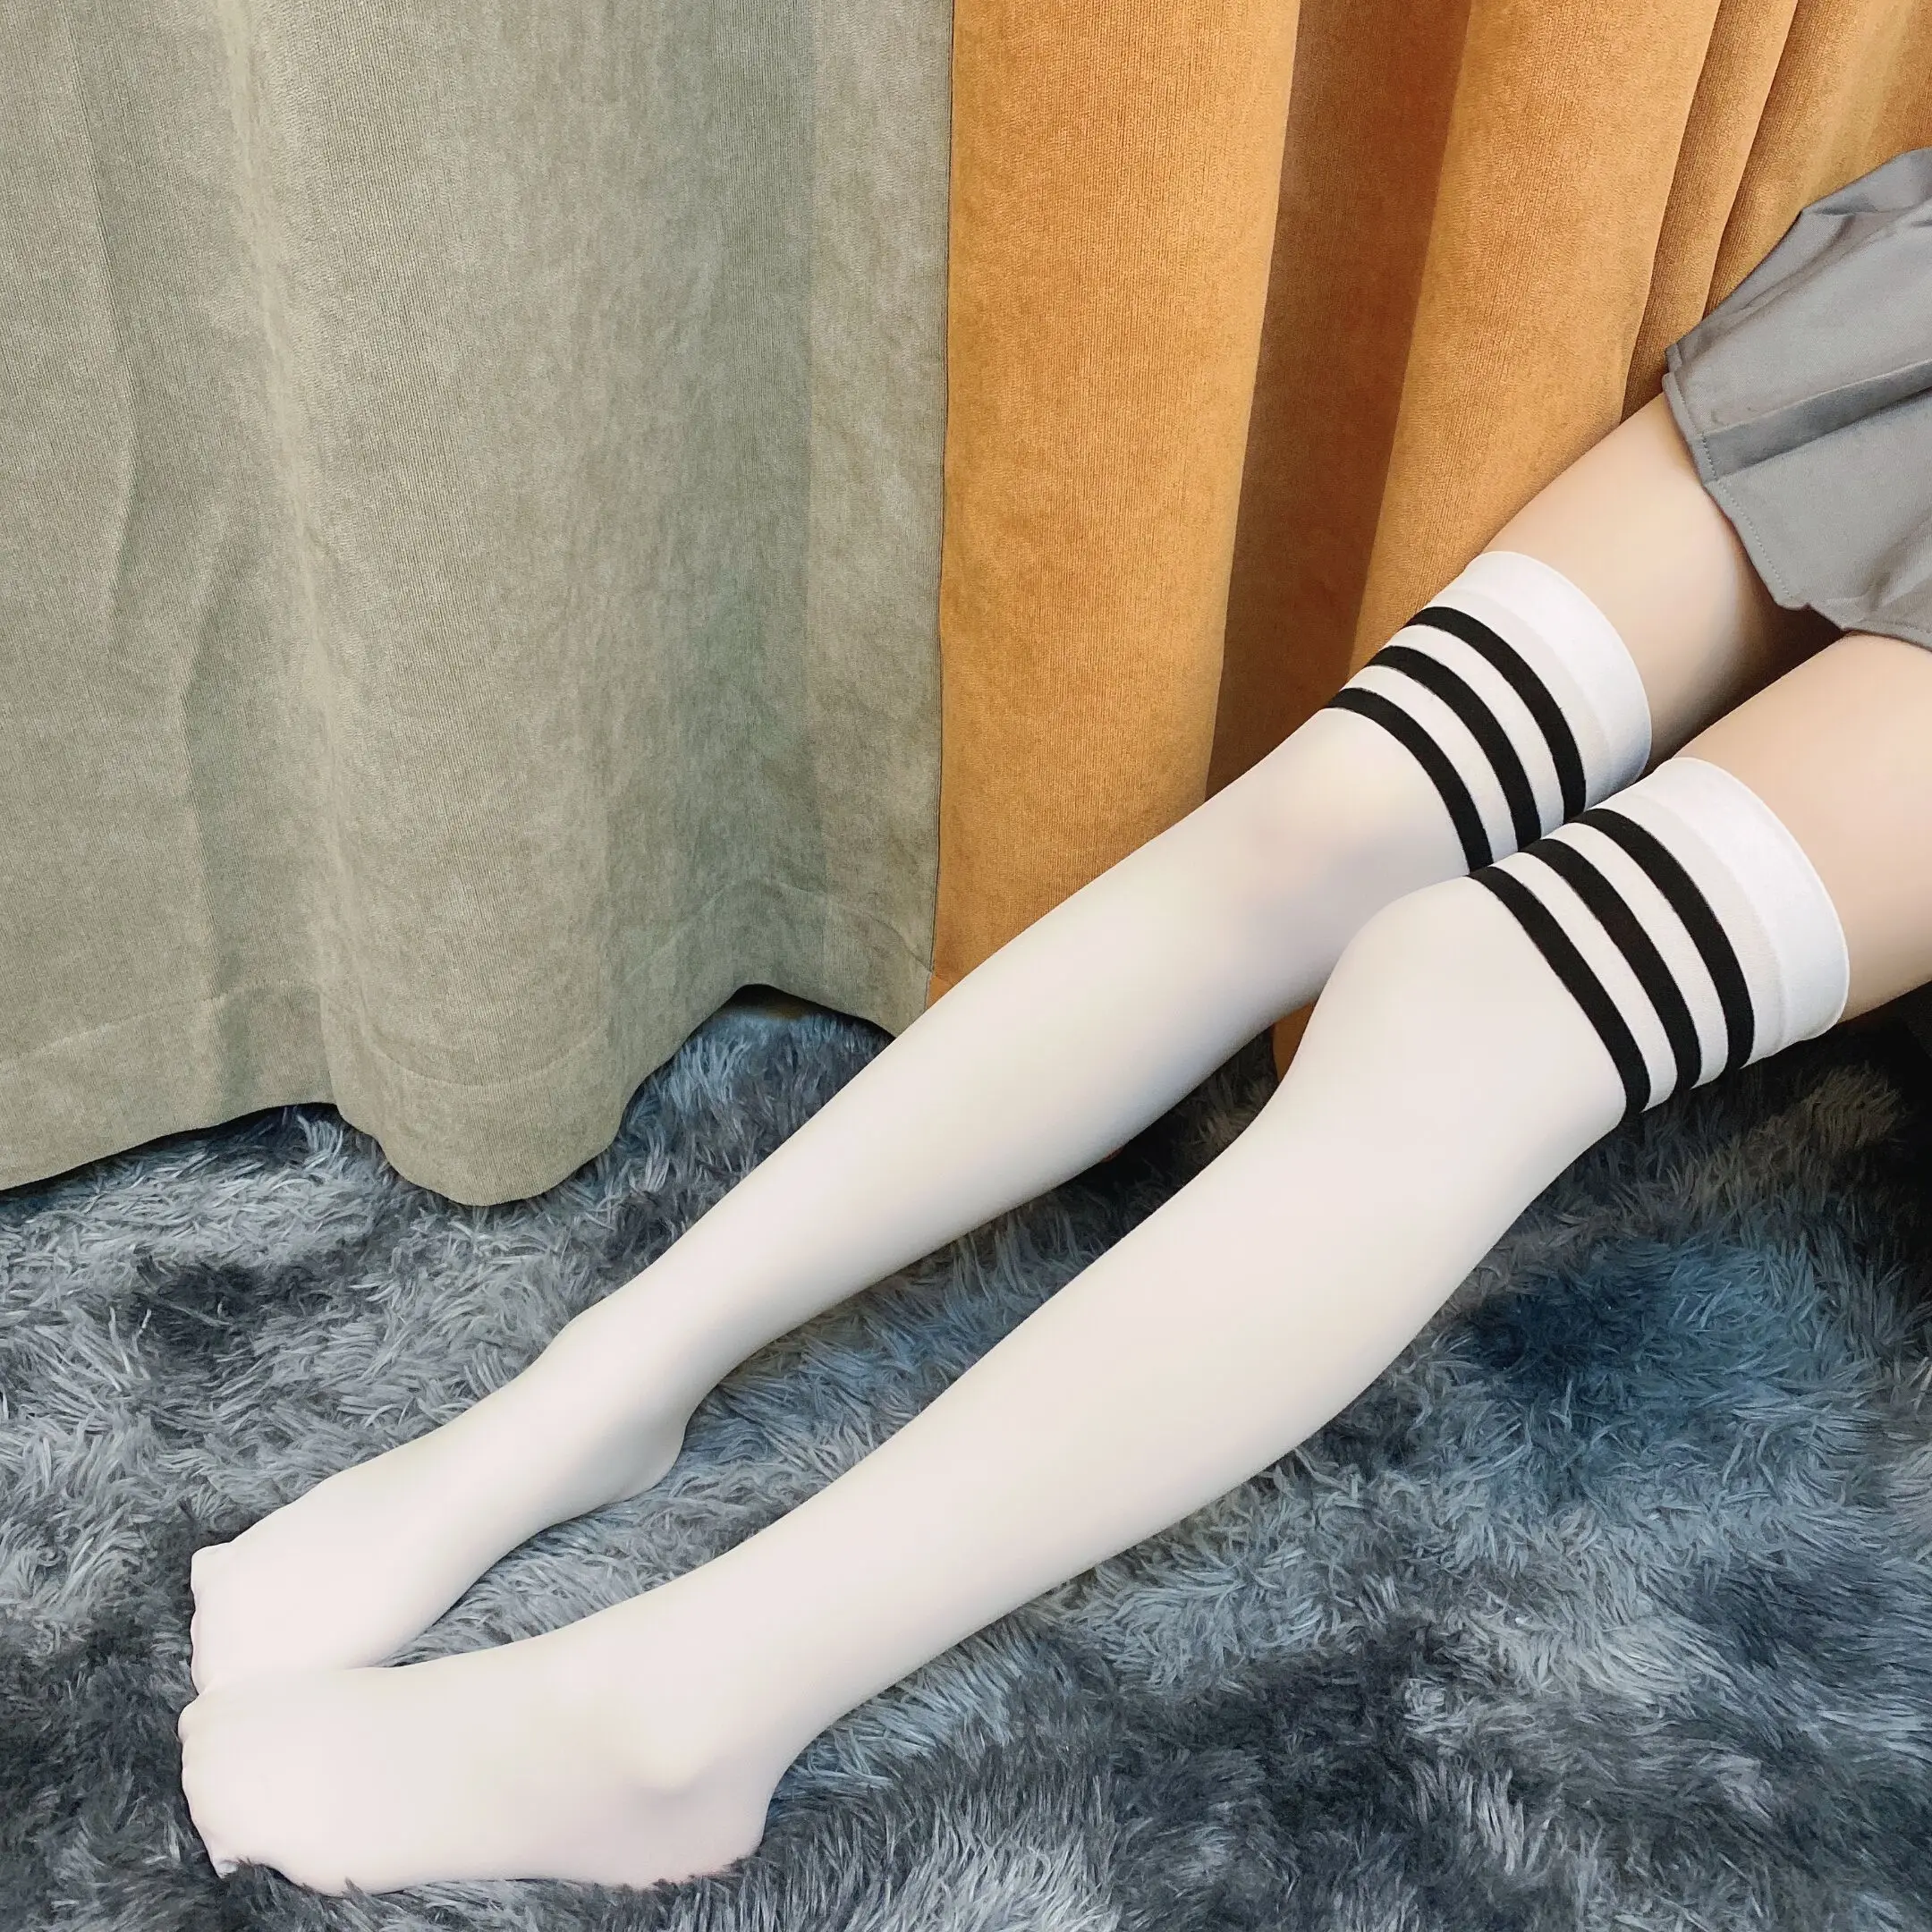 Best of Babes in thigh high socks